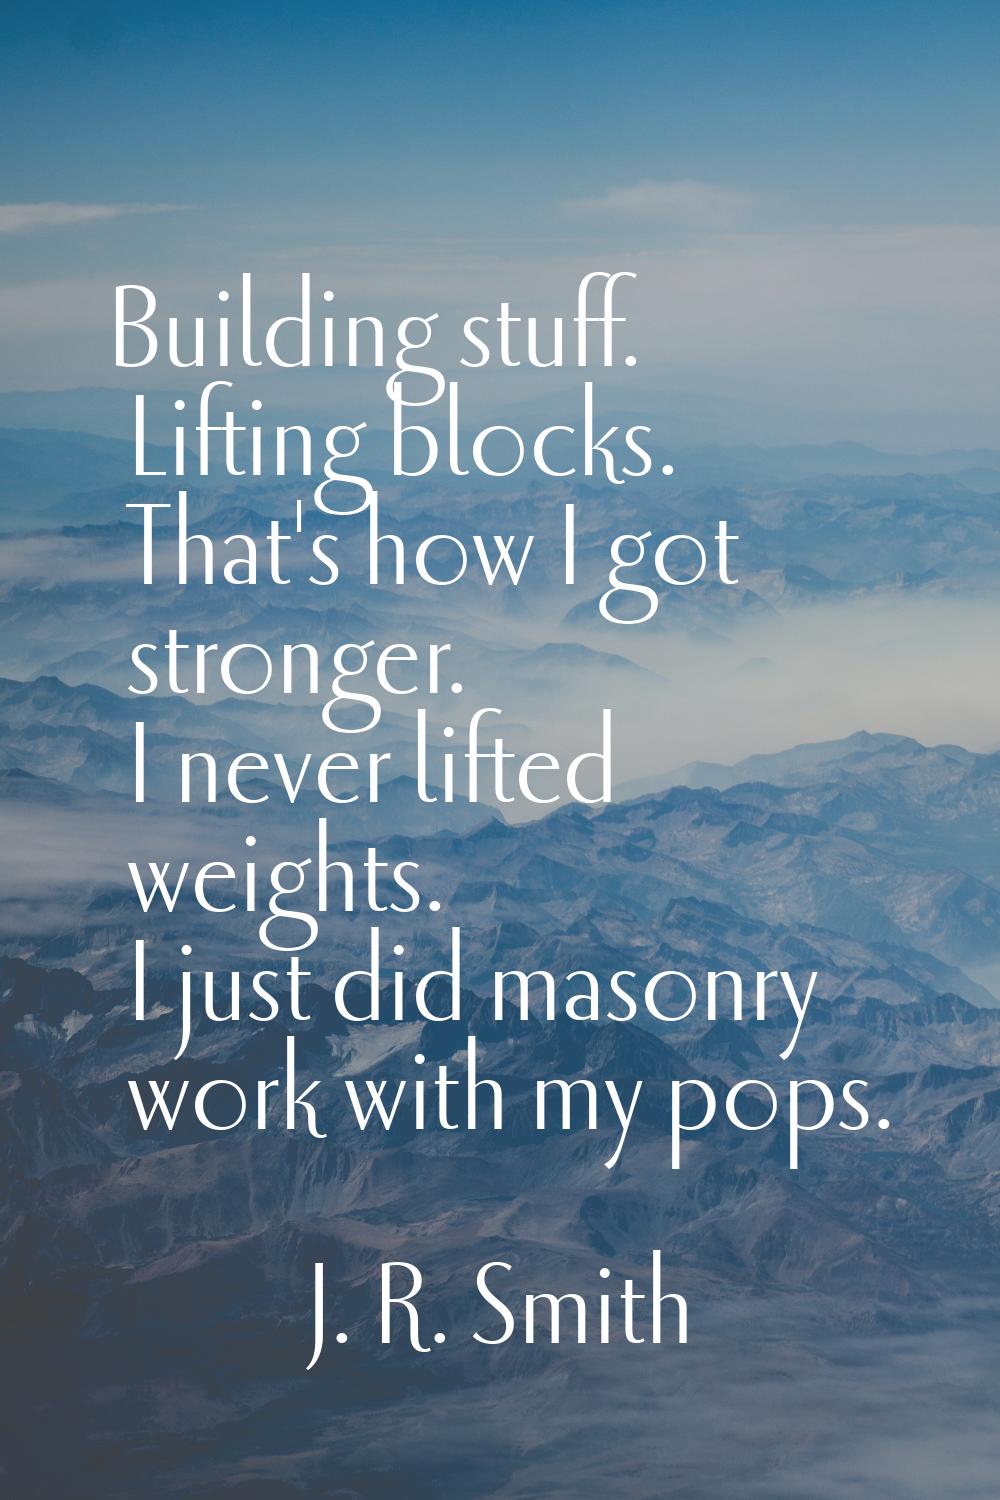 Building stuff. Lifting blocks. That's how I got stronger. I never lifted weights. I just did mason